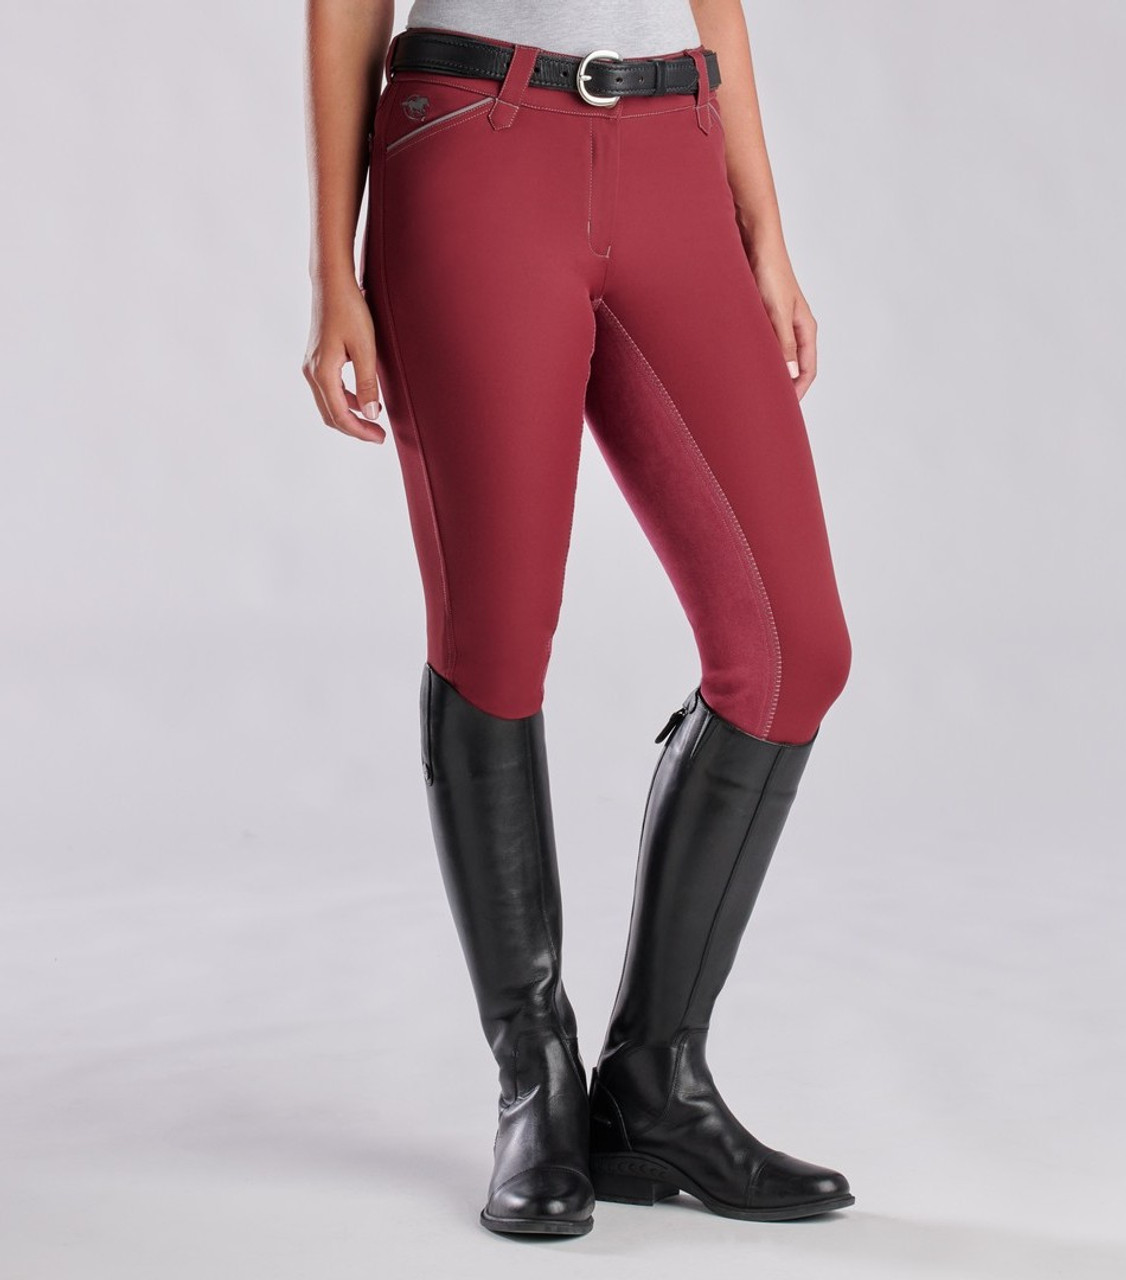 Piper Evolution Full Seat Breeches- Ladies Riding Clothes